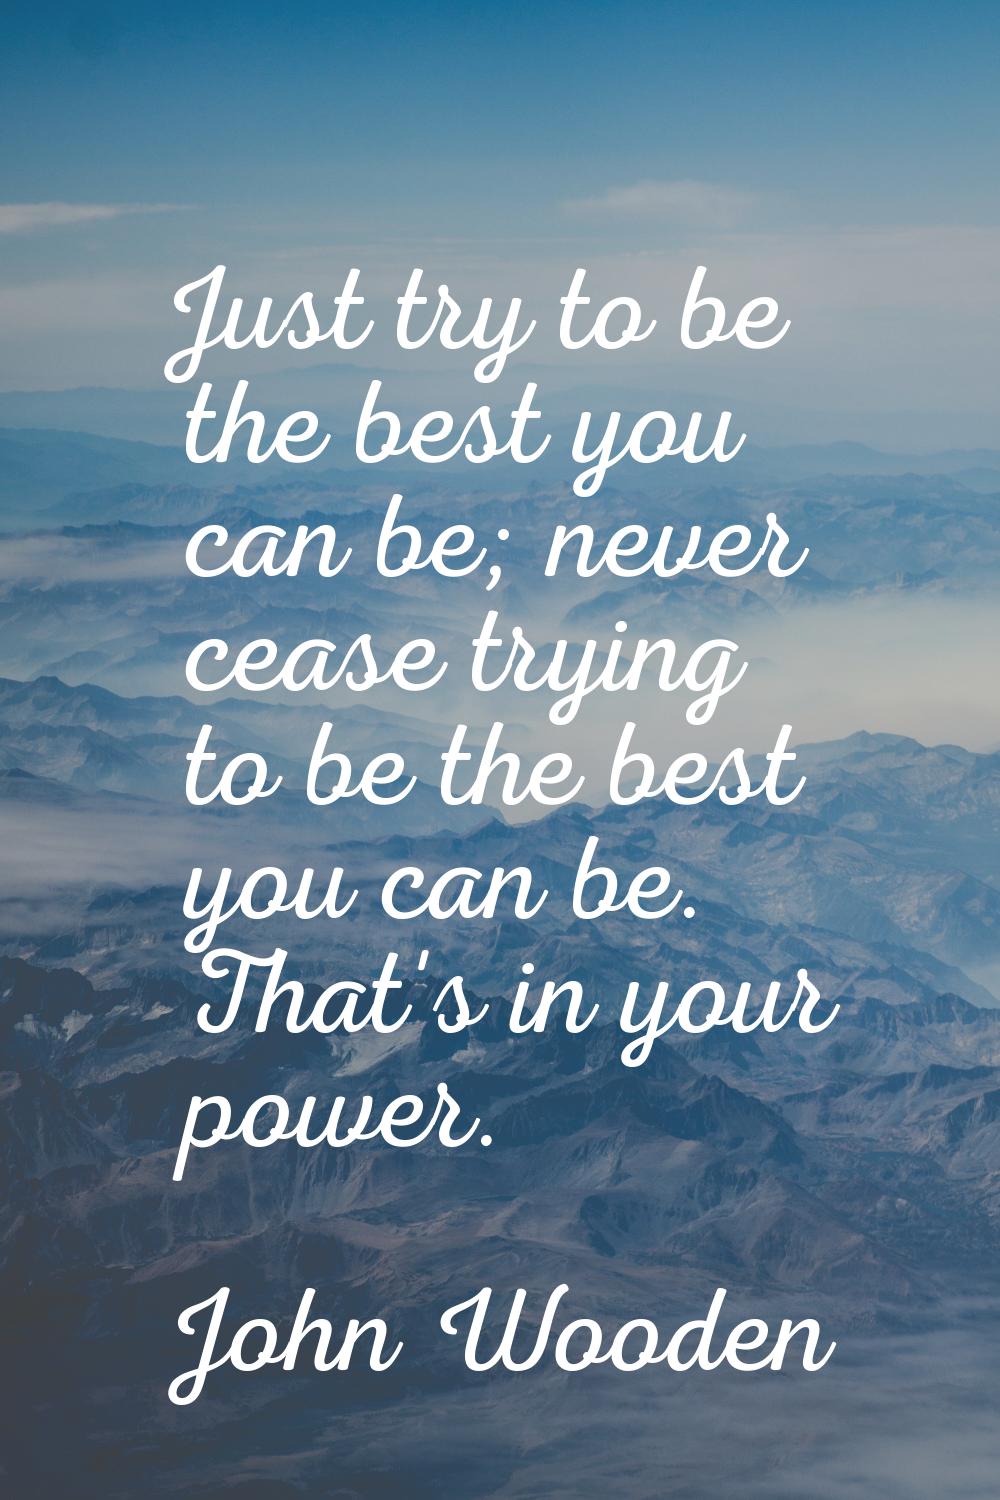 Just try to be the best you can be; never cease trying to be the best you can be. That's in your po